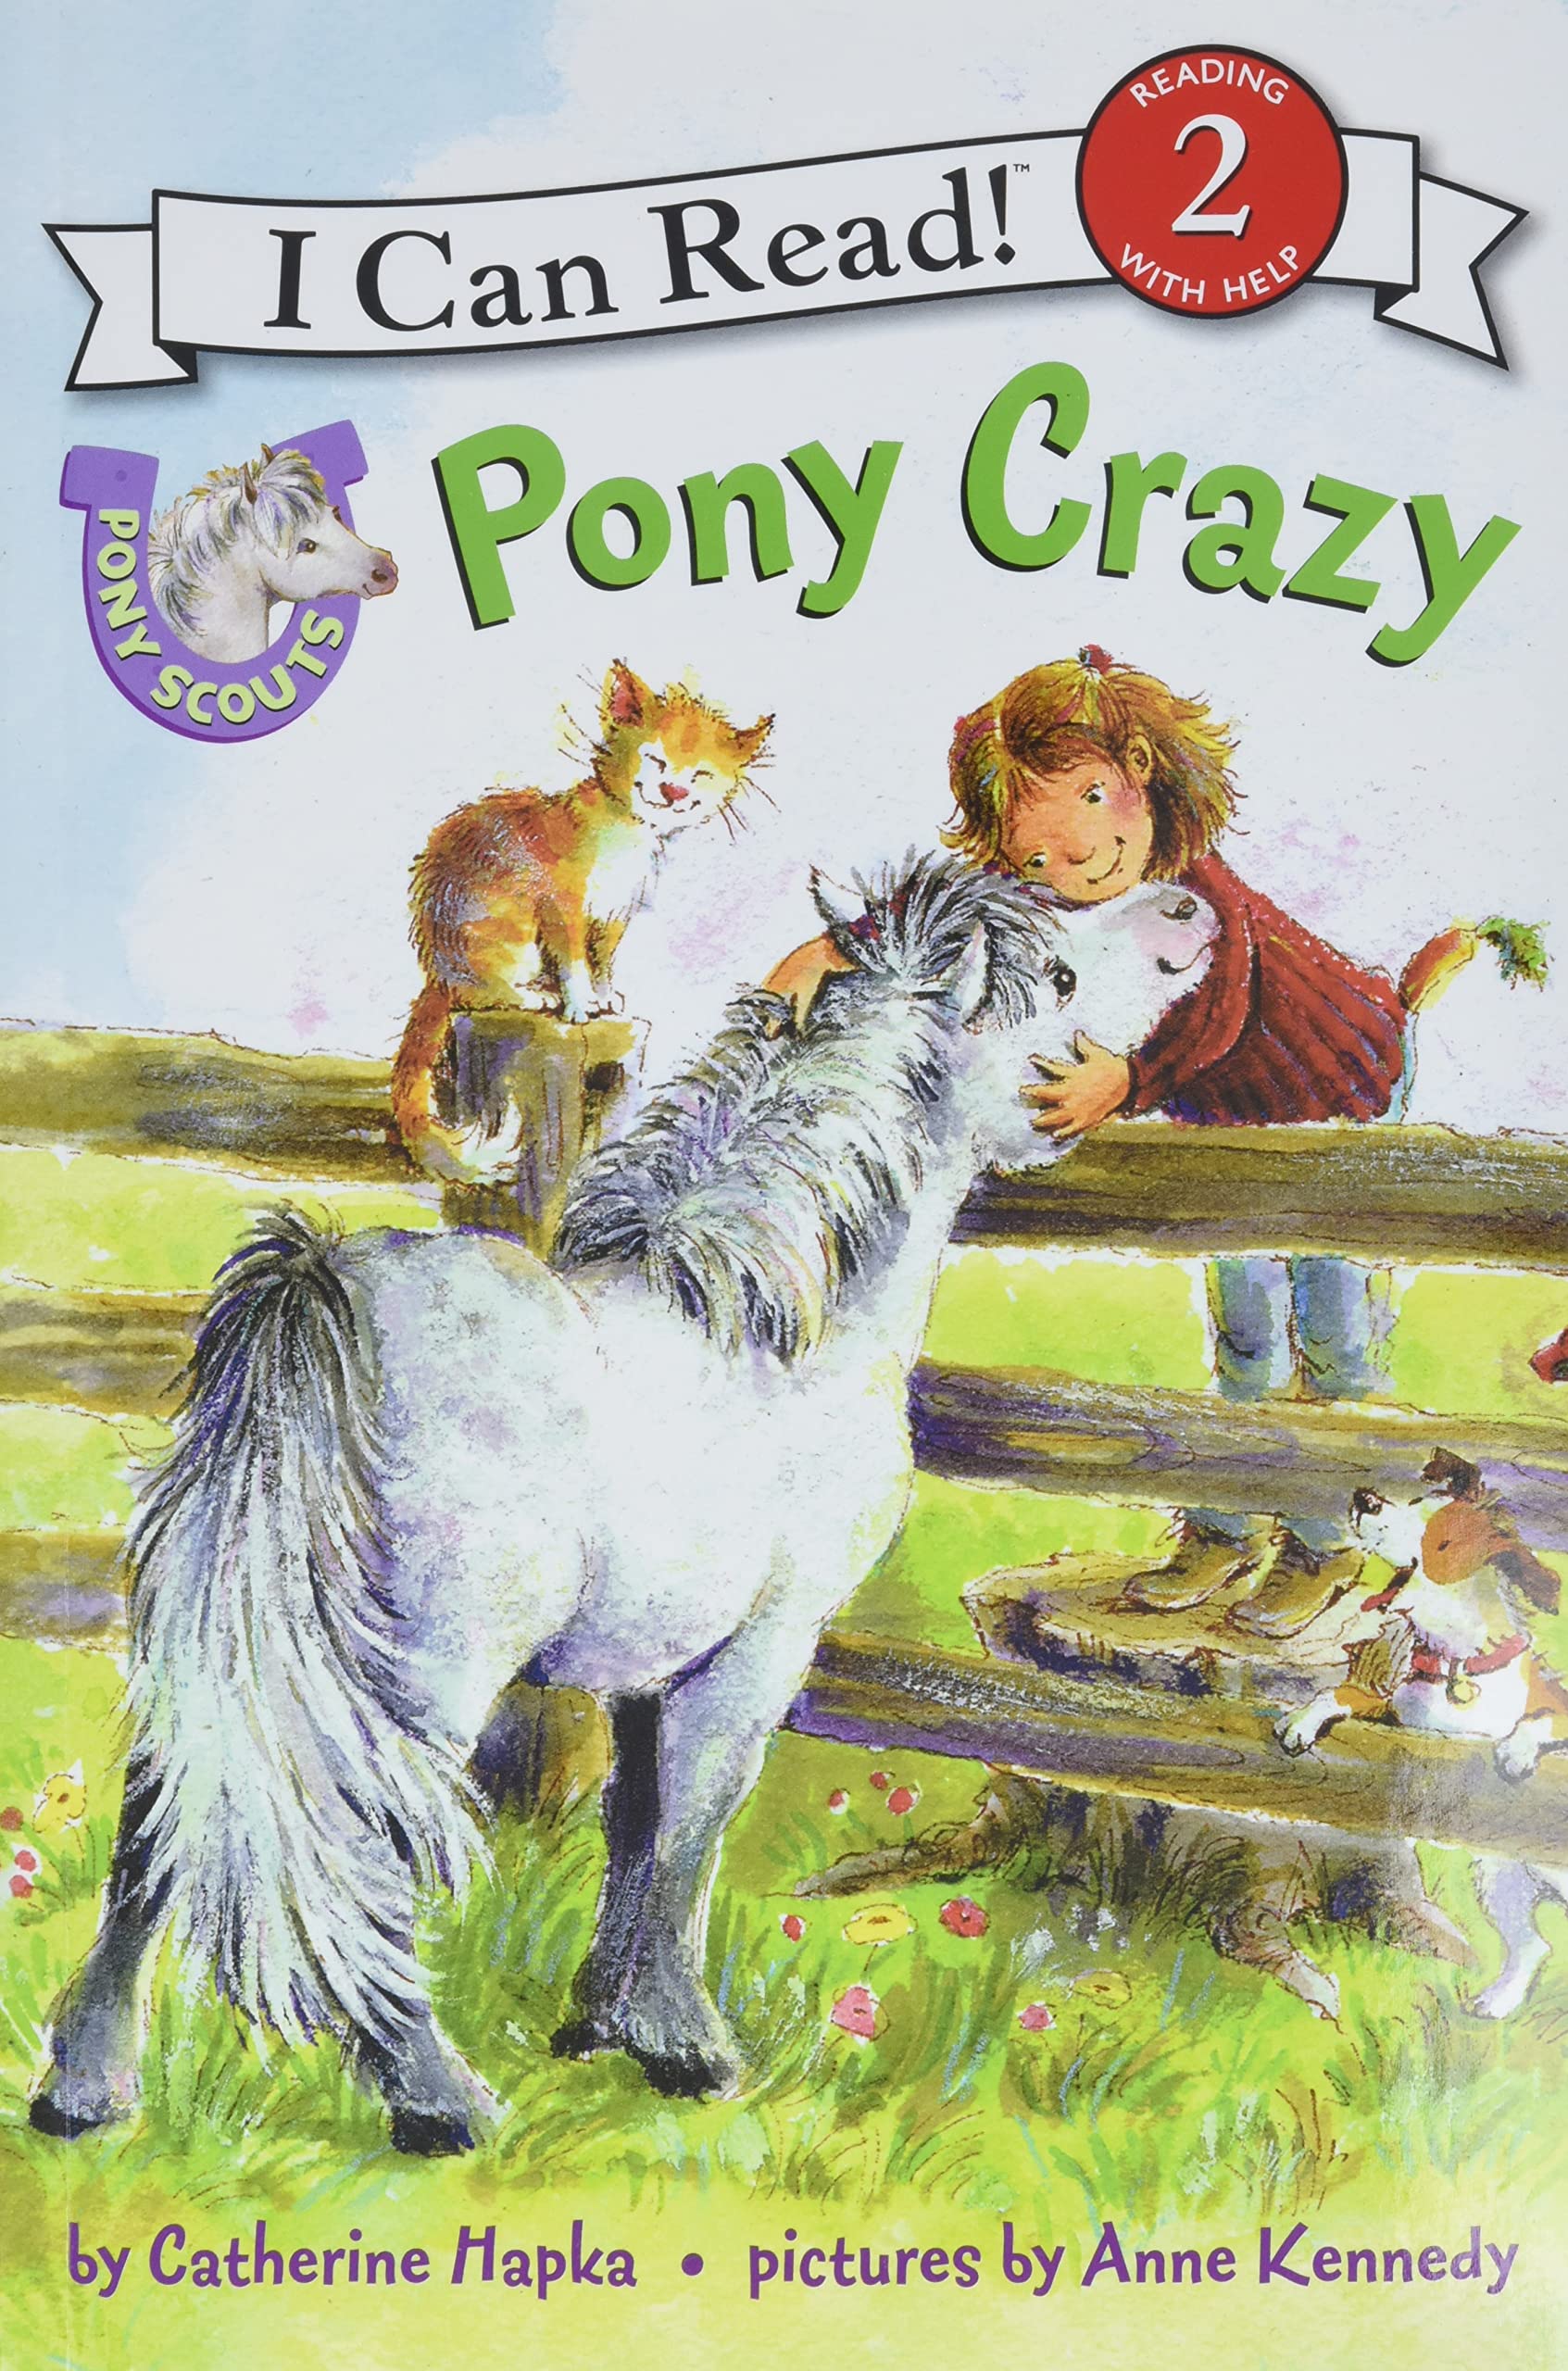 IMG : I can Read Level 2 Pony Crazy